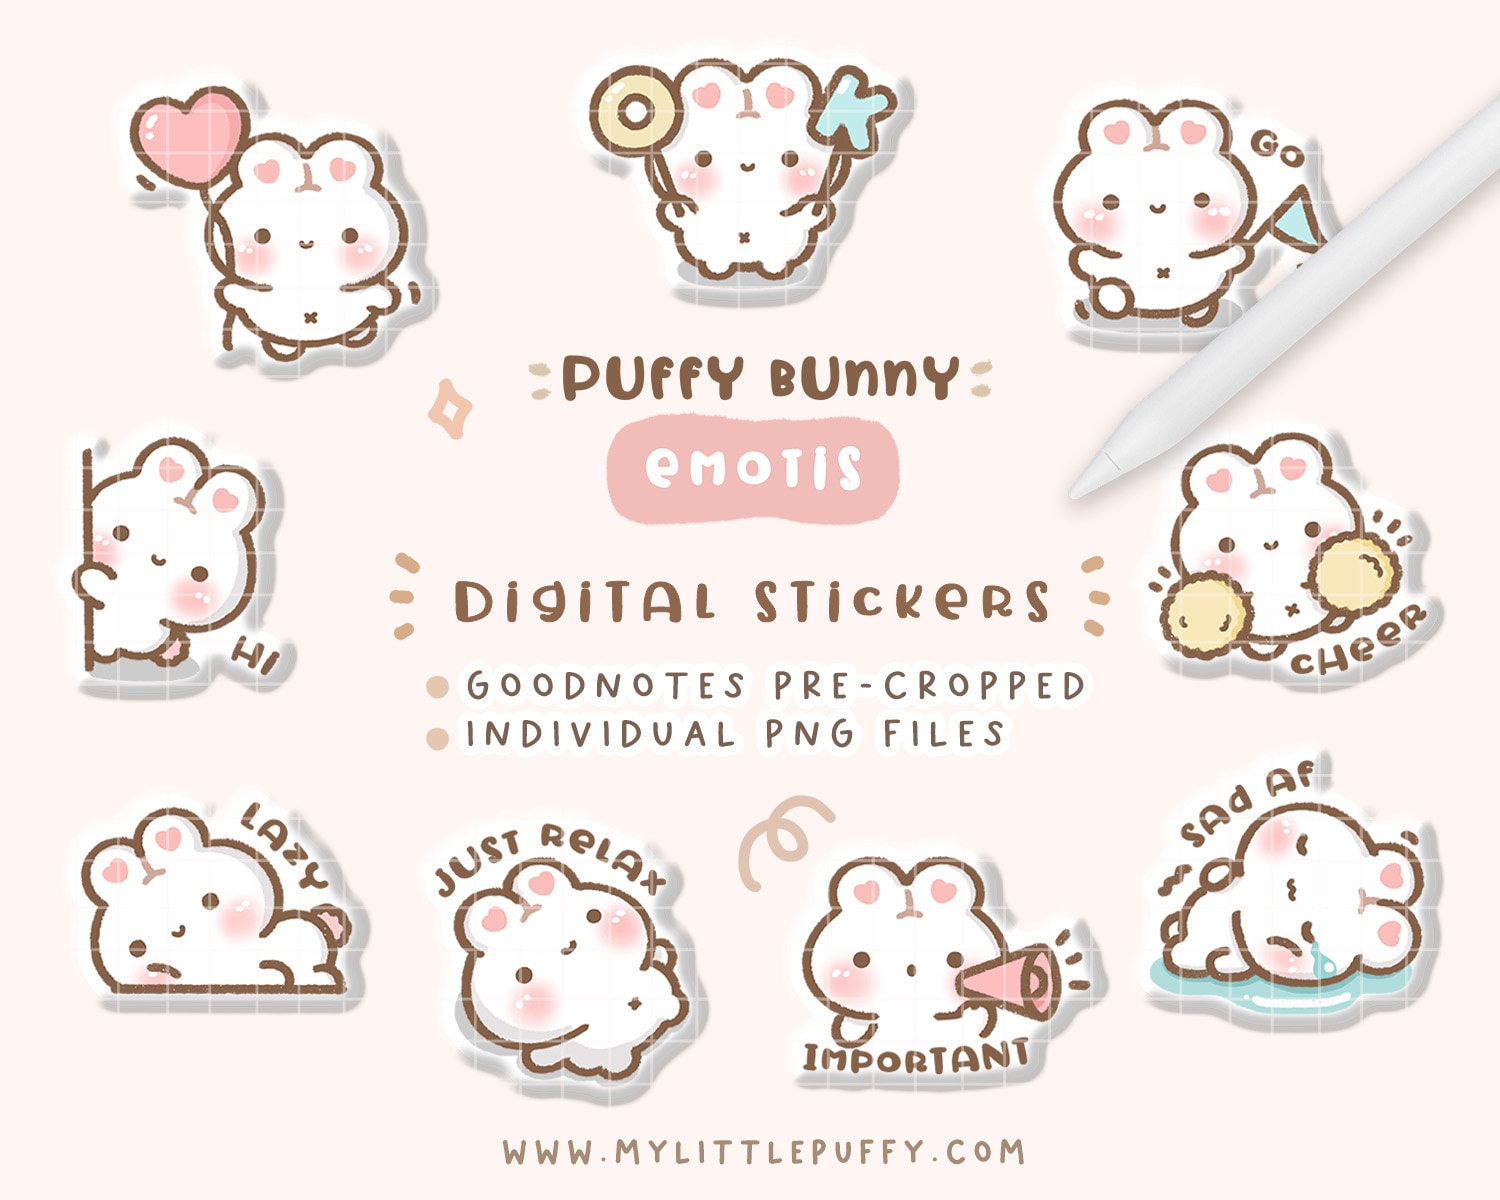 Flamingueo 53 Stickers Aesthetic Planner Stickers Cute Room Decor Sticker  Pack Vintage Stickers Kawaii Laptop Sticker